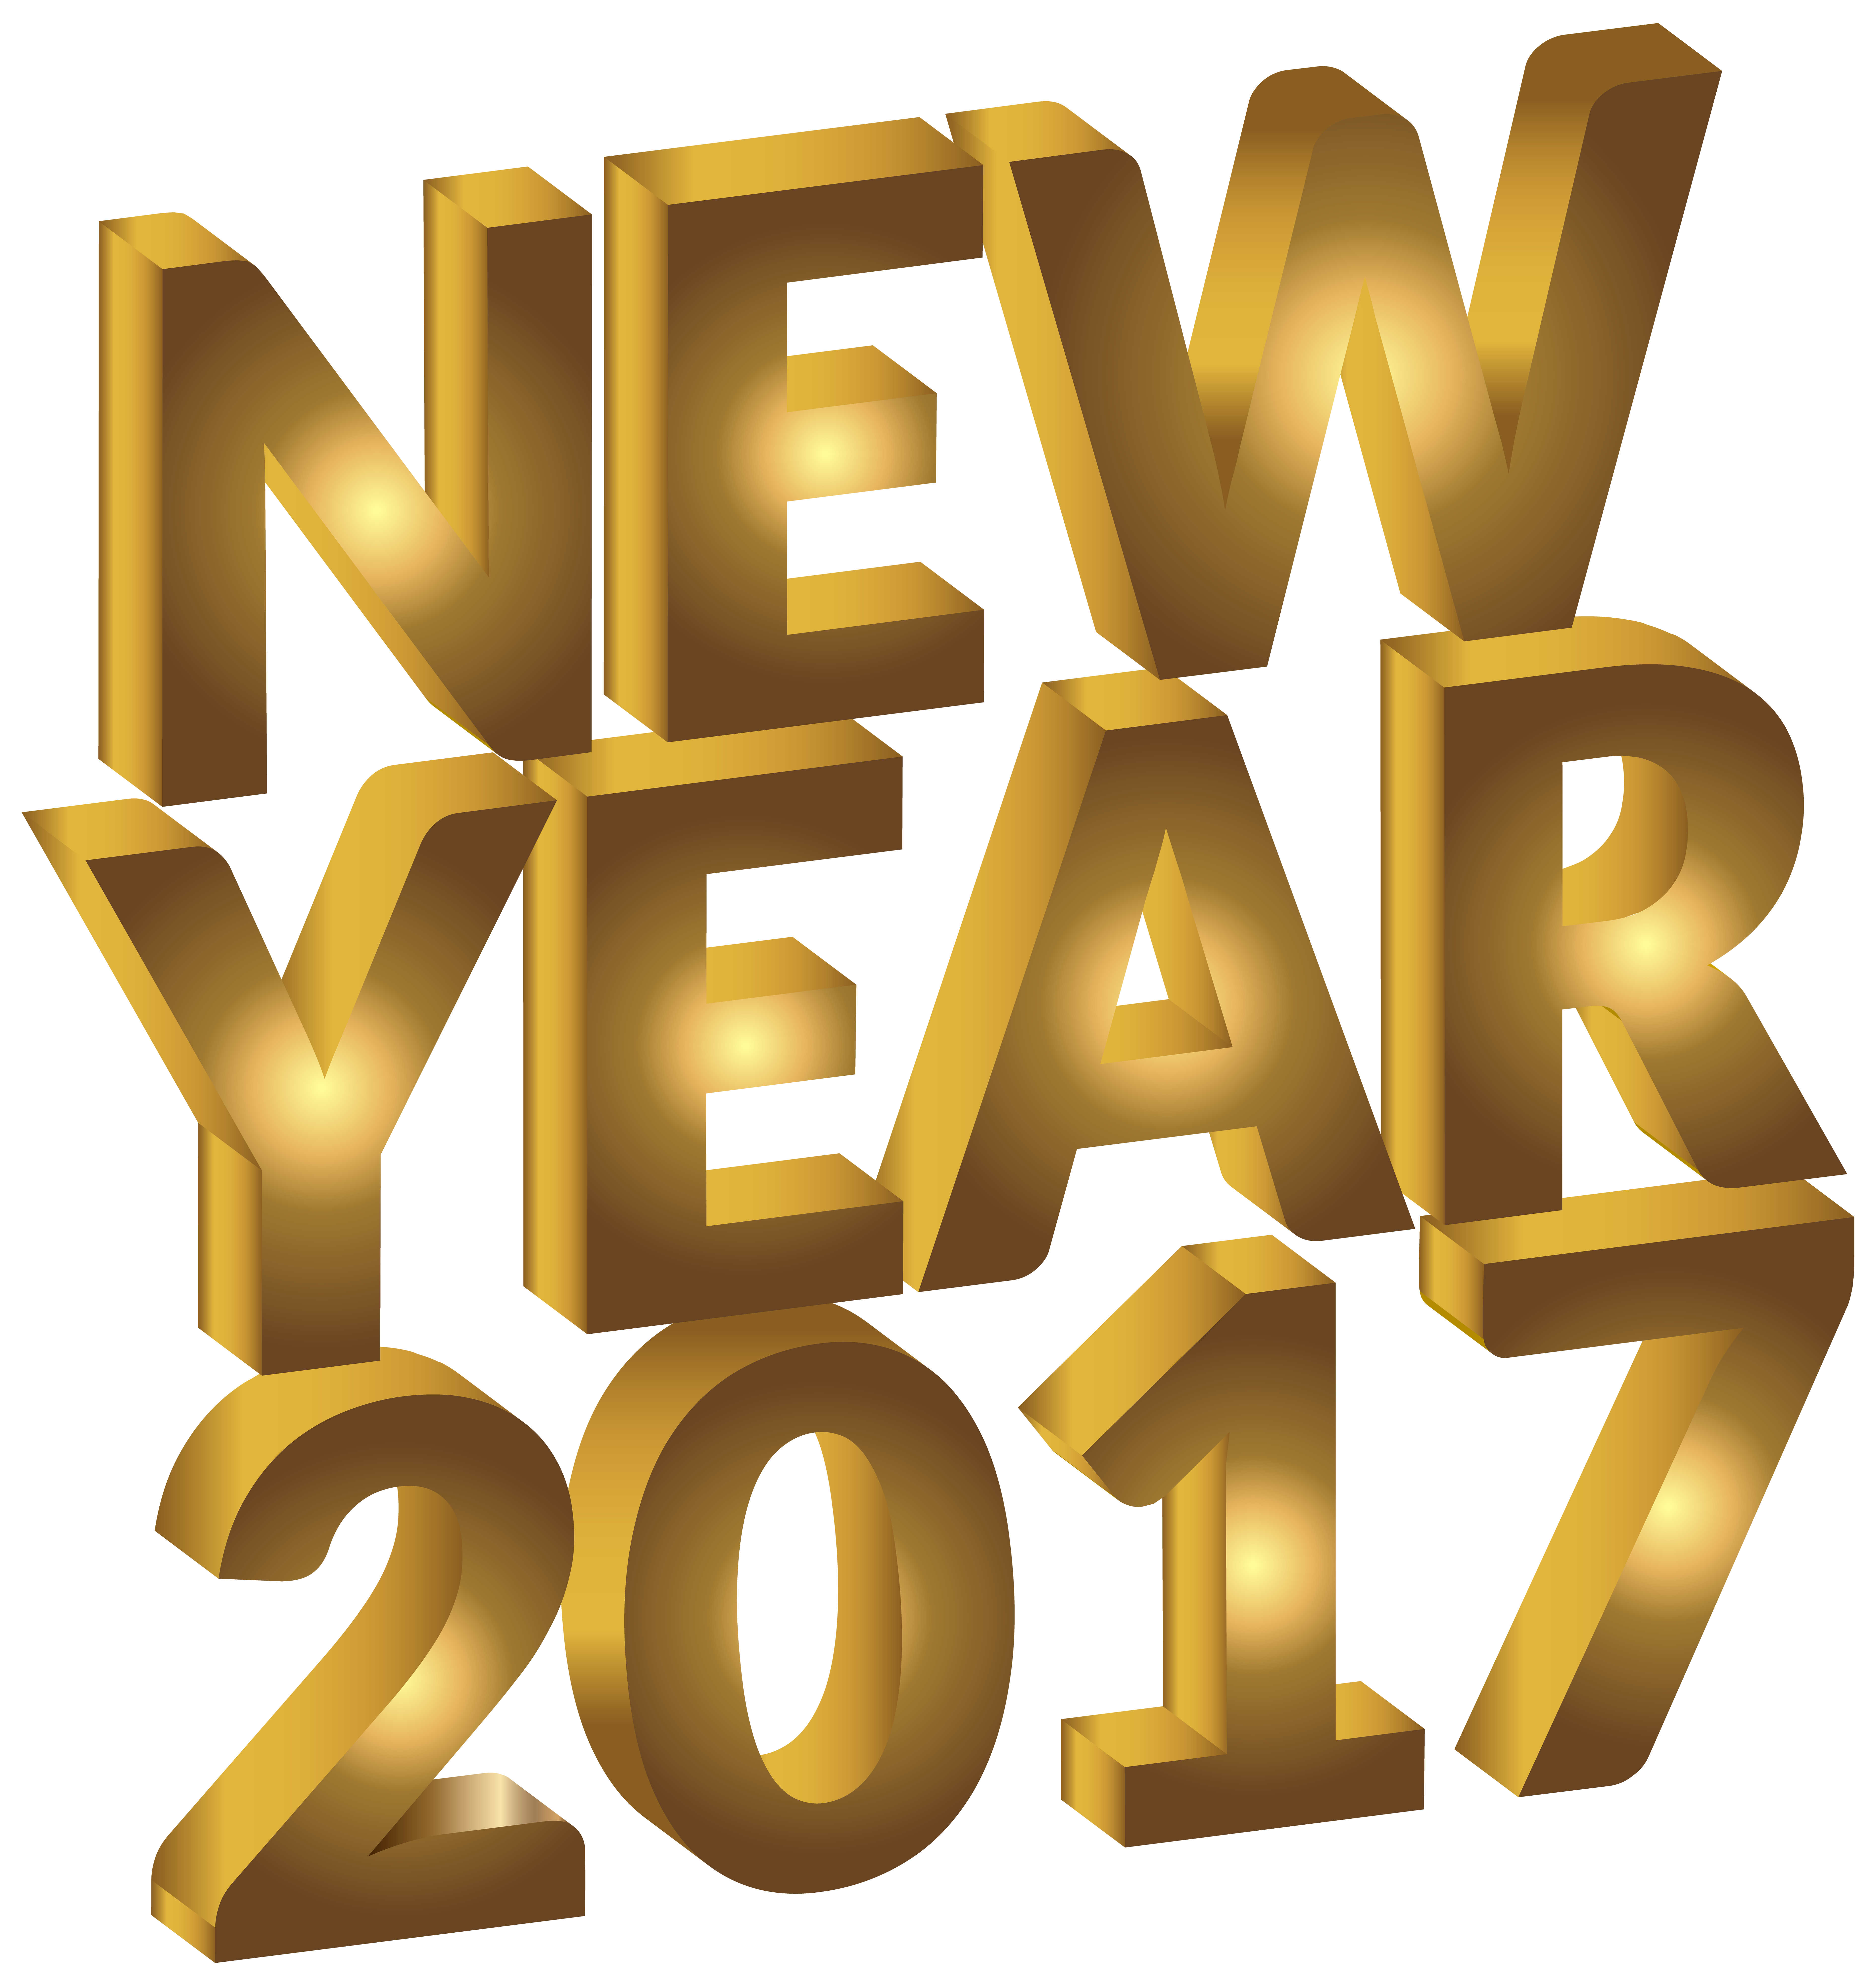 New Year 2017 PNG Clip Art Image | Gallery Yopriceville ...